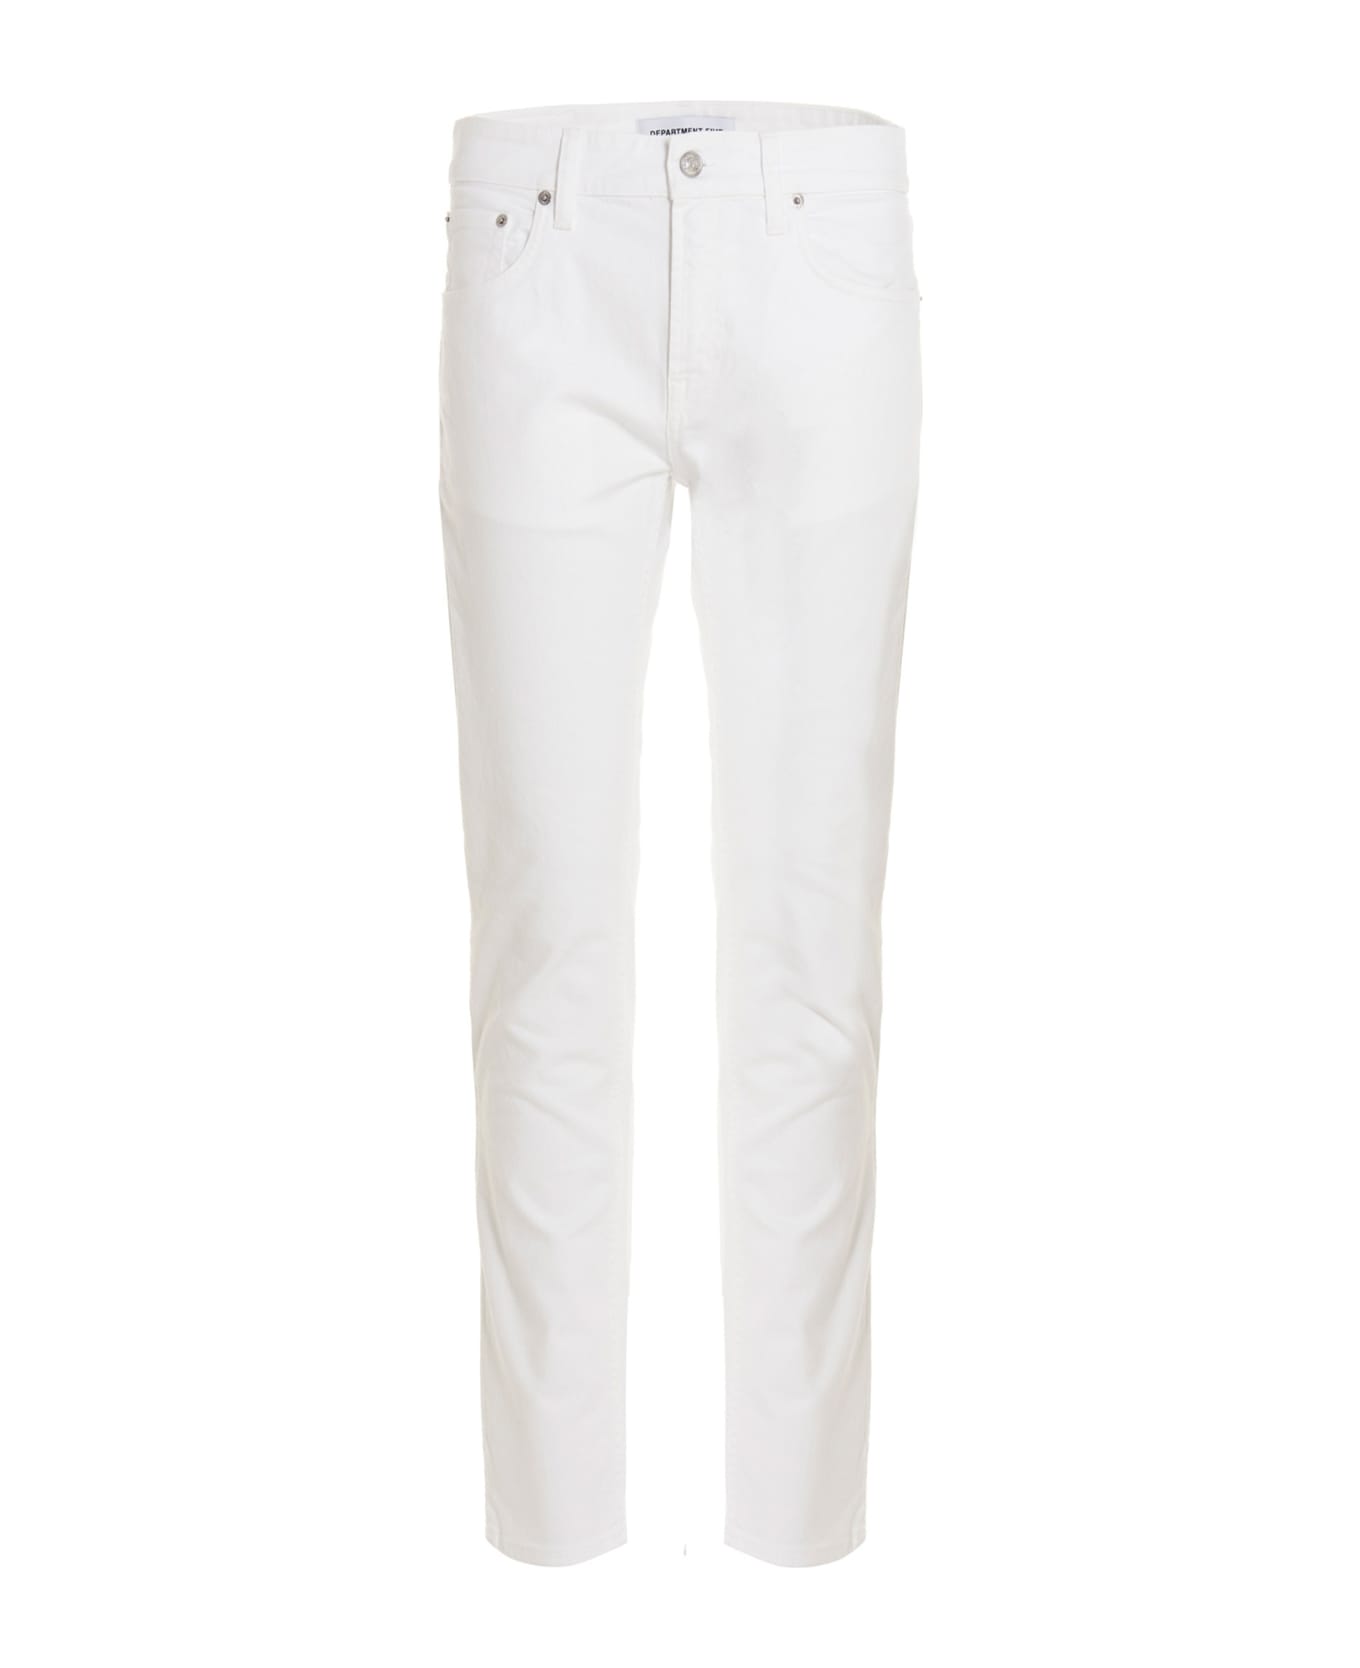 Department Five 'skeith' Jeans - White ボトムス